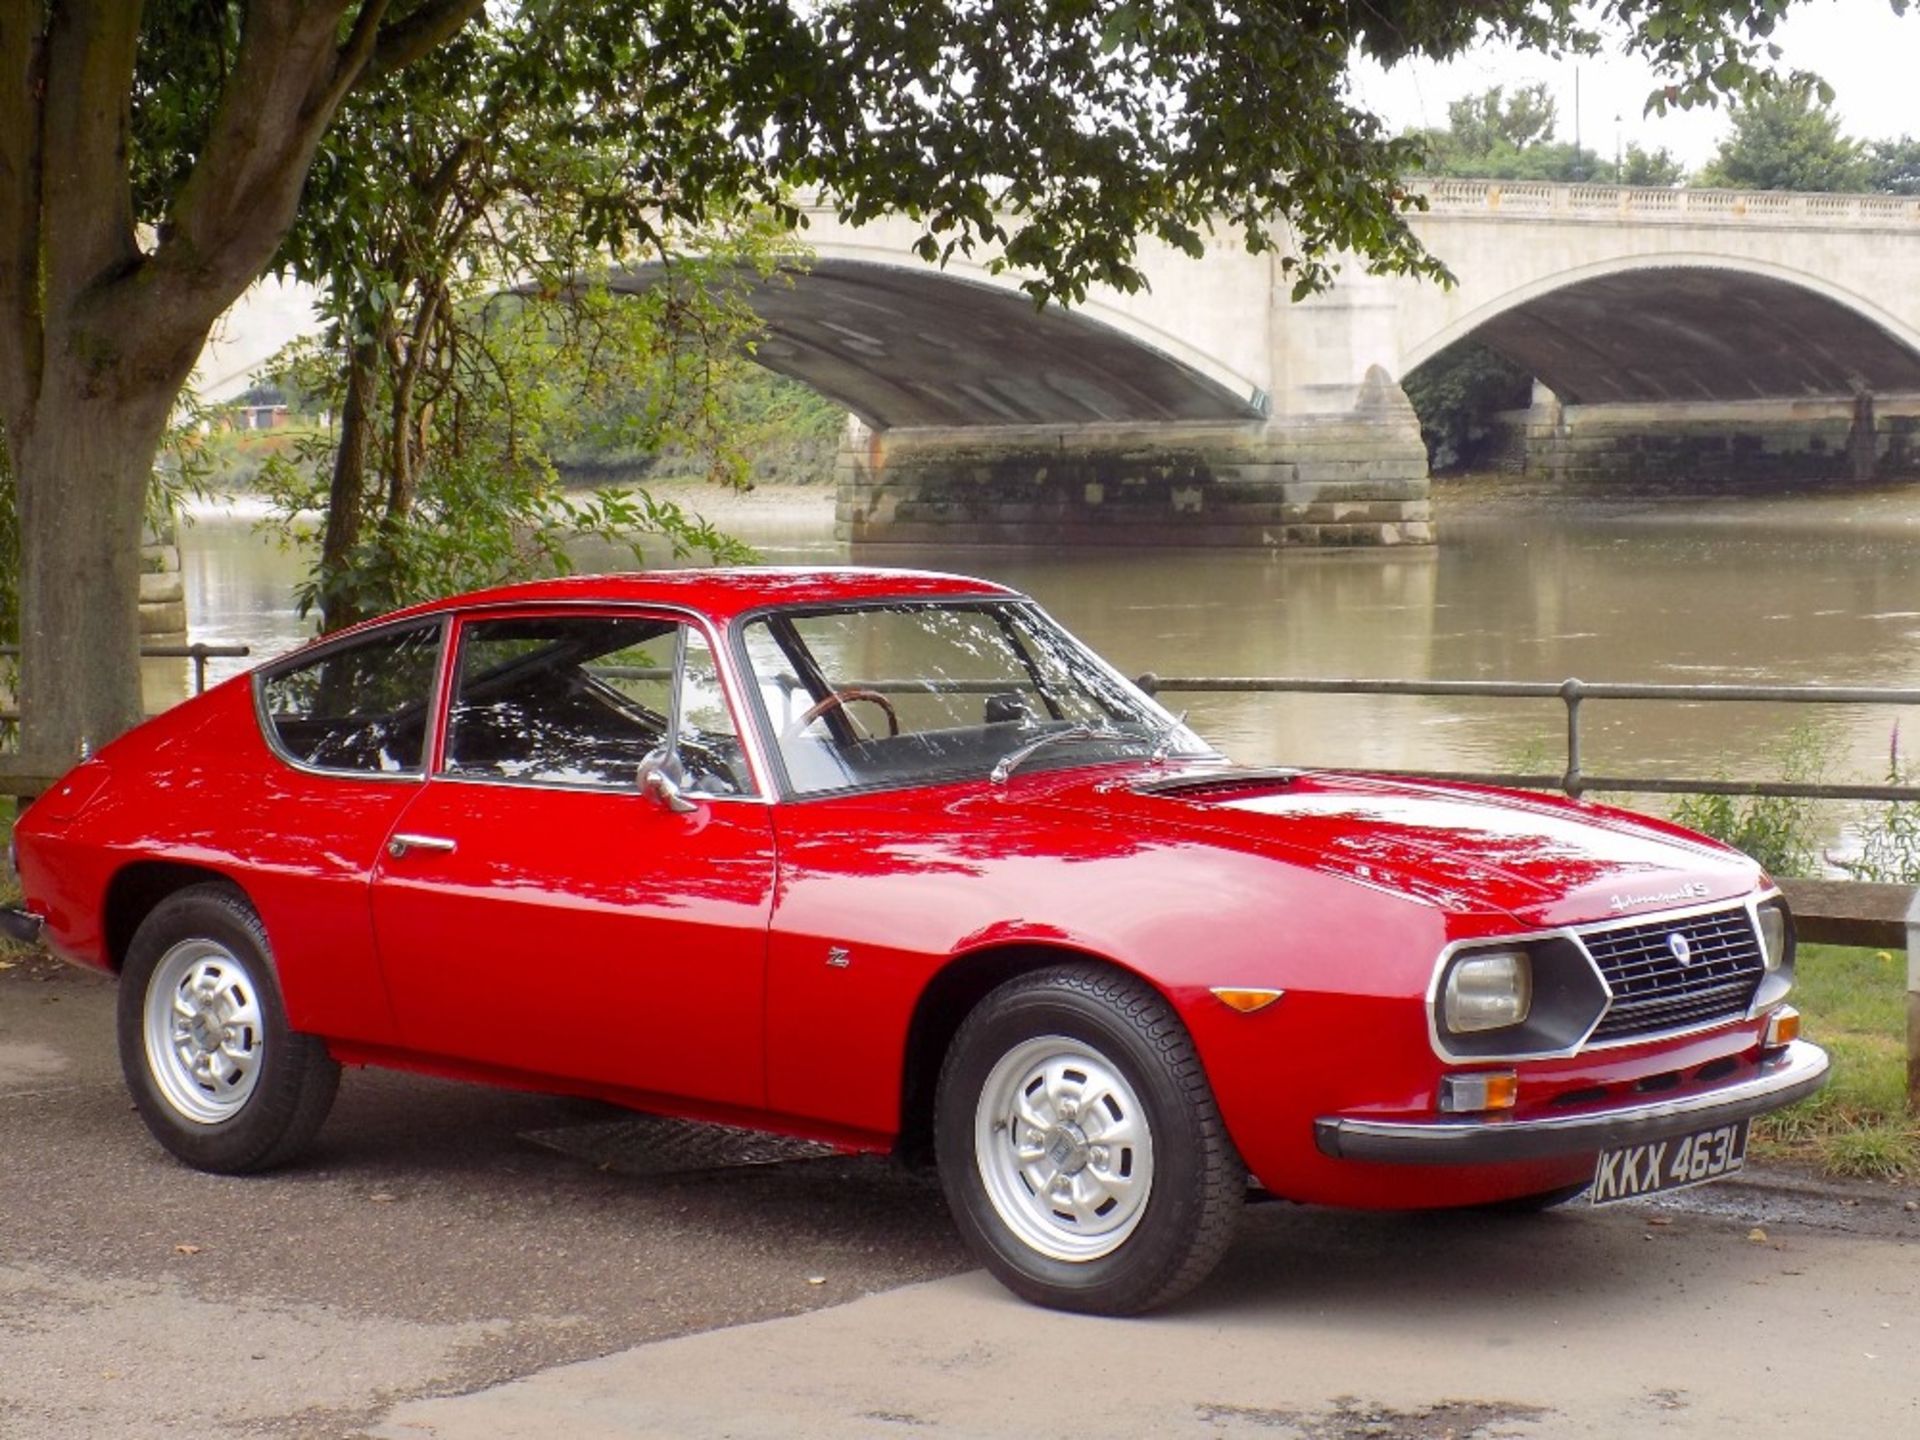 1972 LANCIA FULVIA SERIES II SPORT ZAGATO Registration Number: KKX 463L Chassis Number: 818.651.3066 - Image 3 of 28